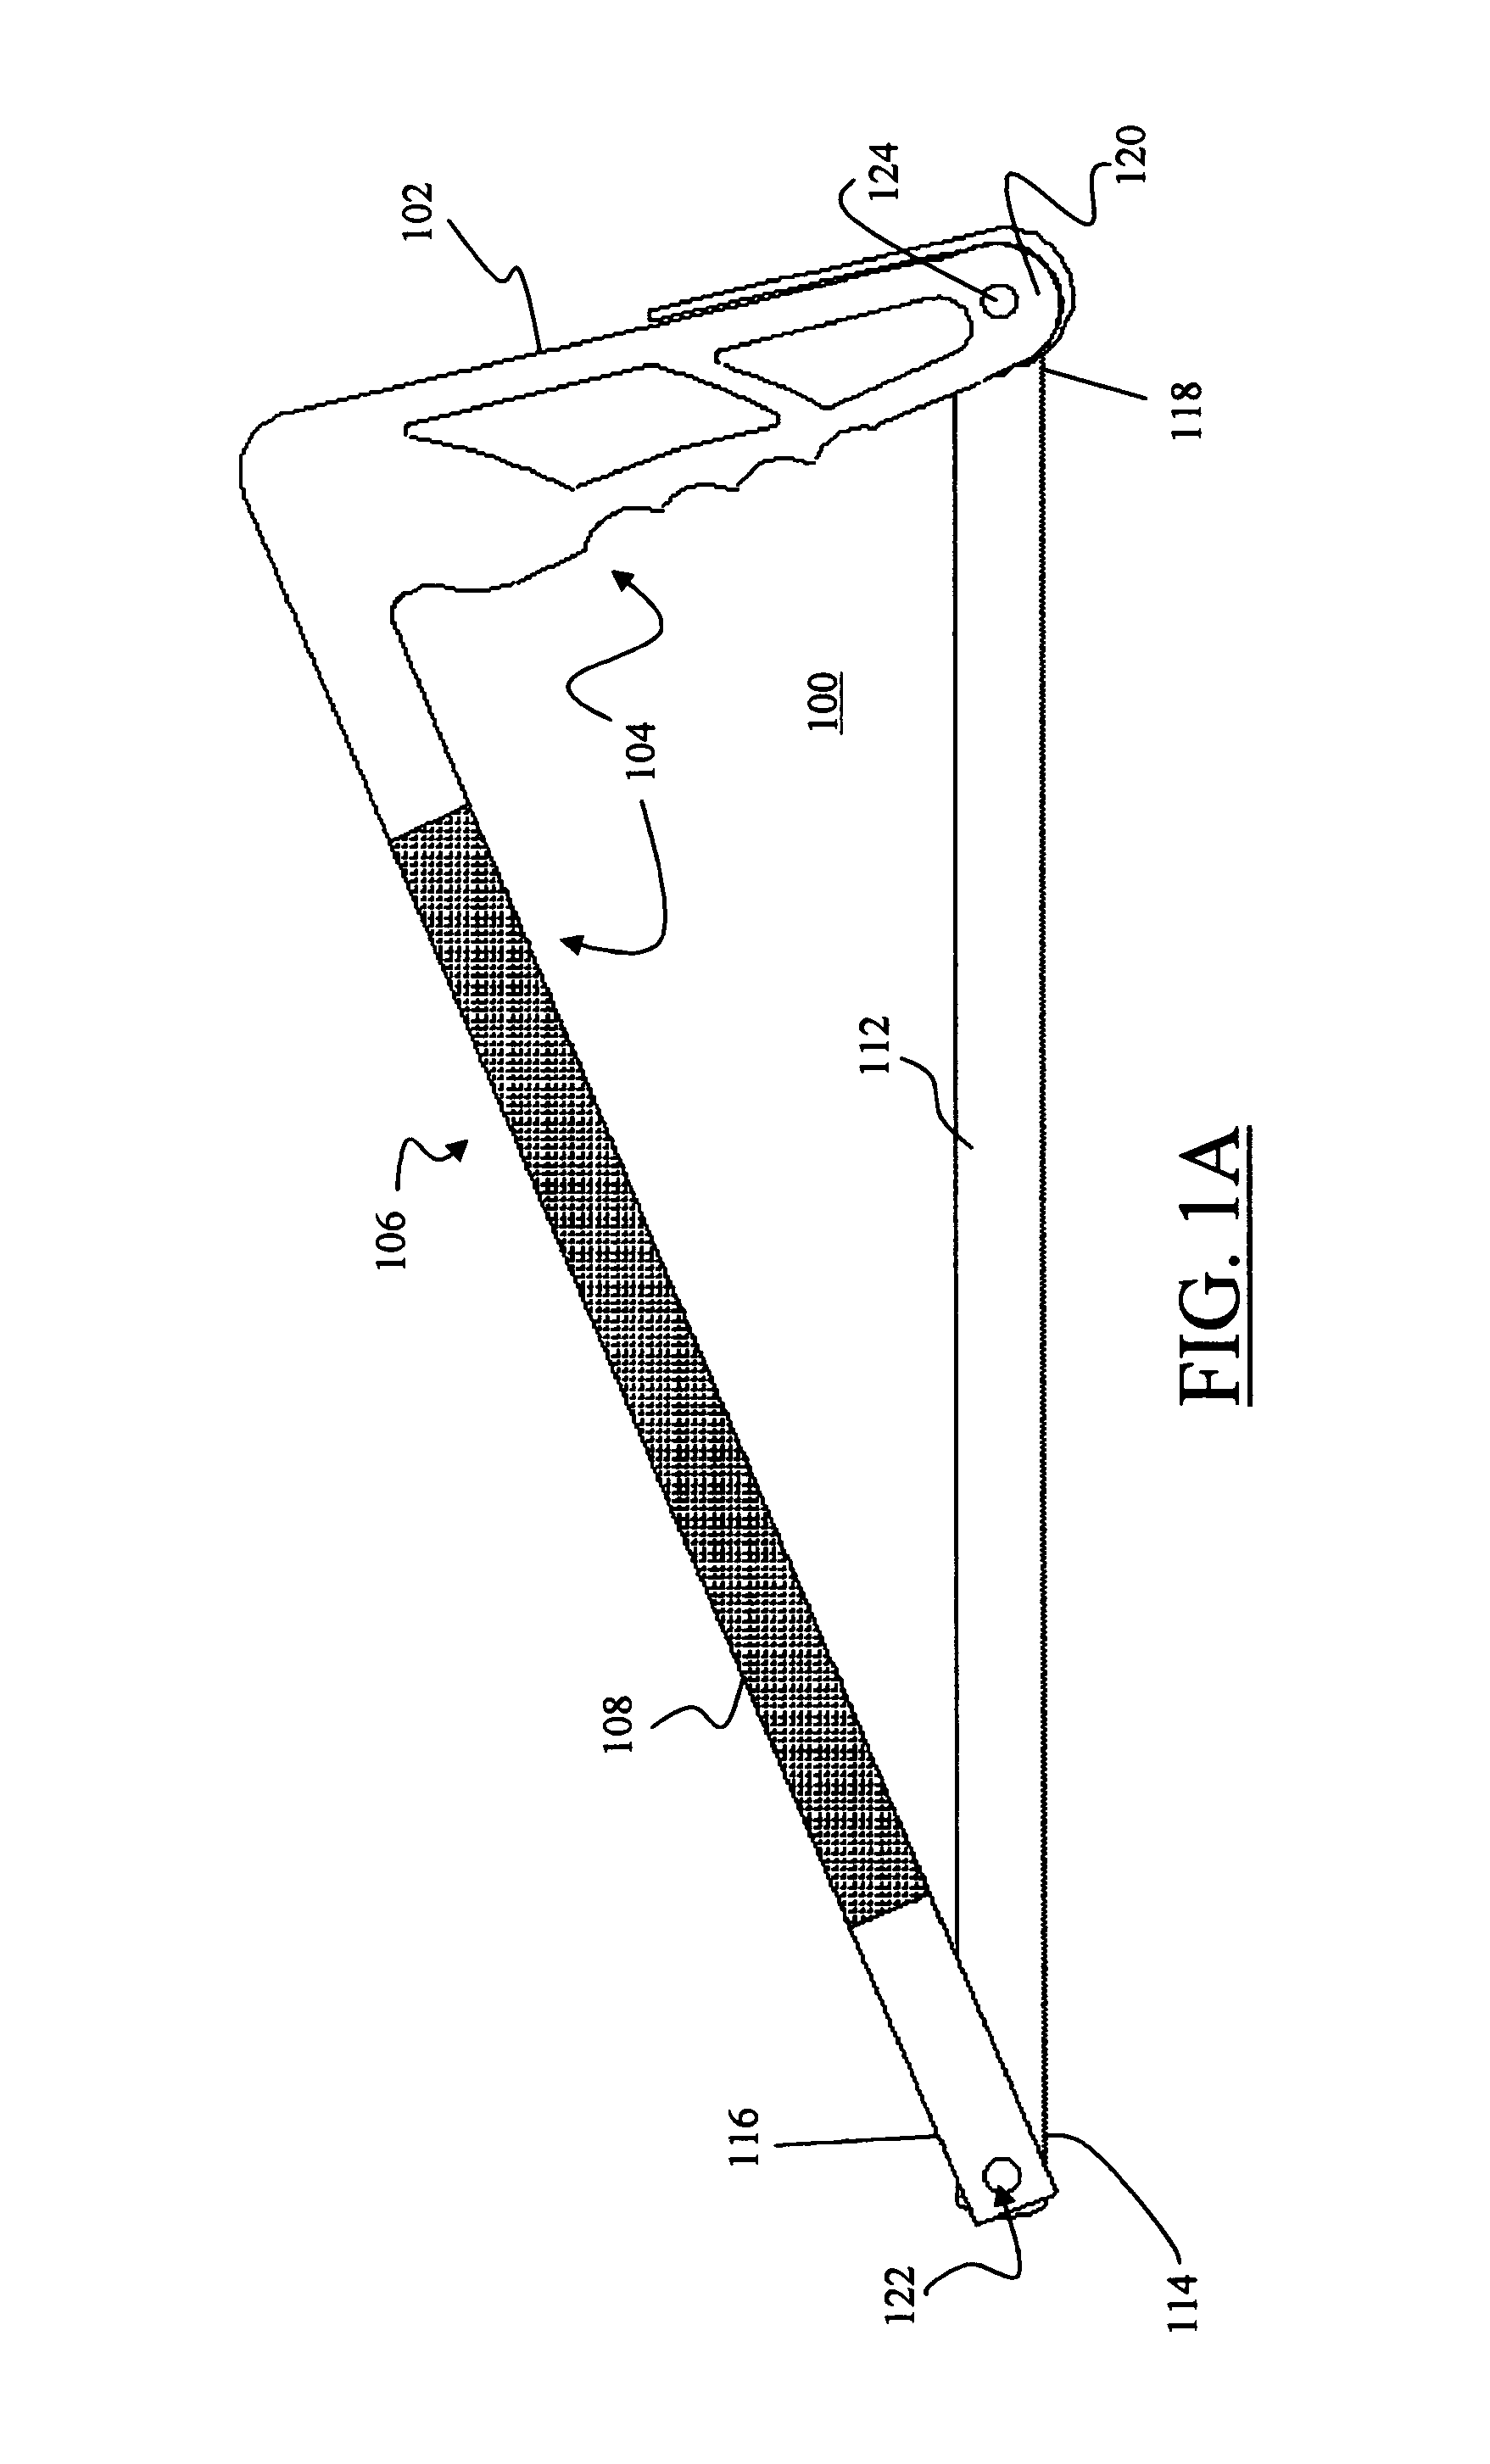 Hacksaw frame having a file as an integral part thereof